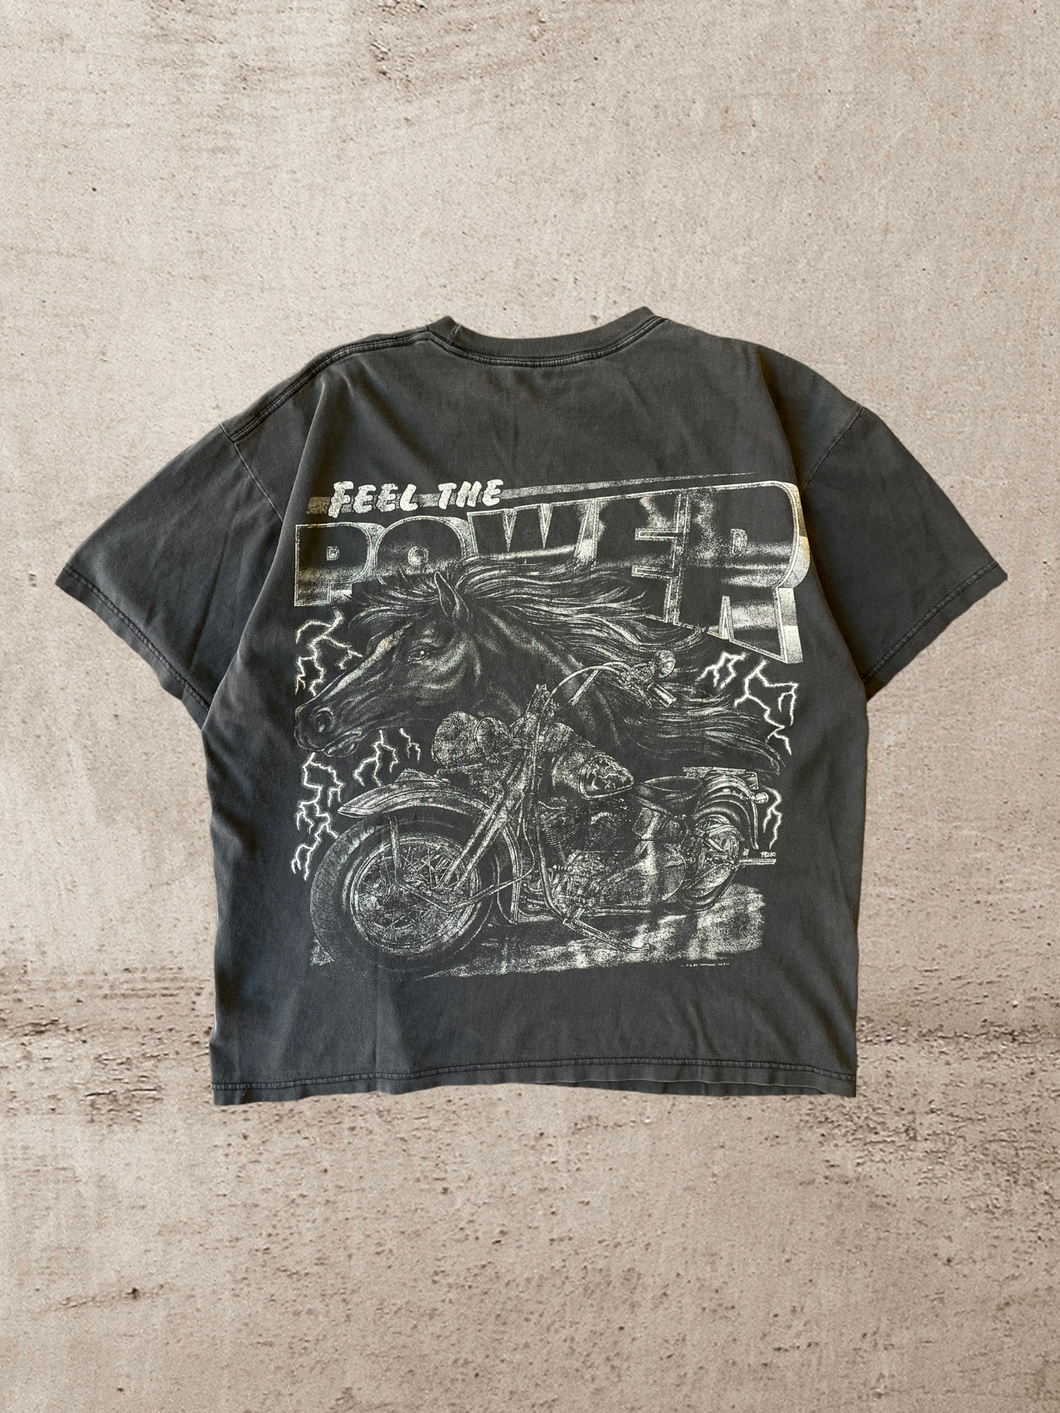 90s Motorcycle Feel The Power T-Shirt - XL